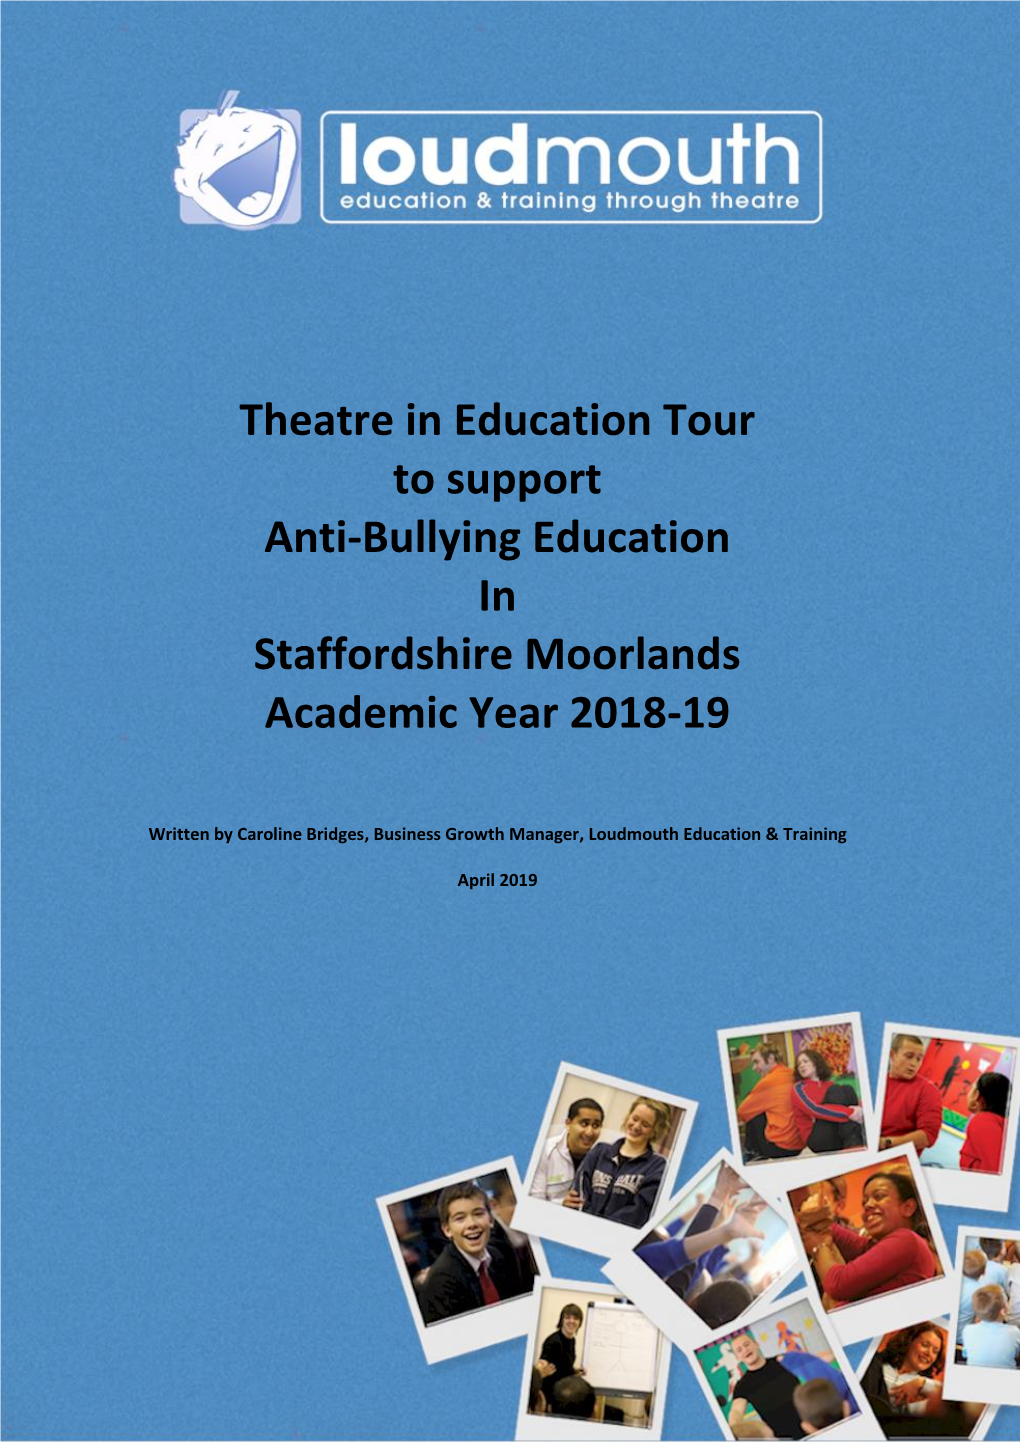 Theatre in Education Tour to Support Anti-Bullying Education in Staffordshire Moorlands Academic Year 2018-19